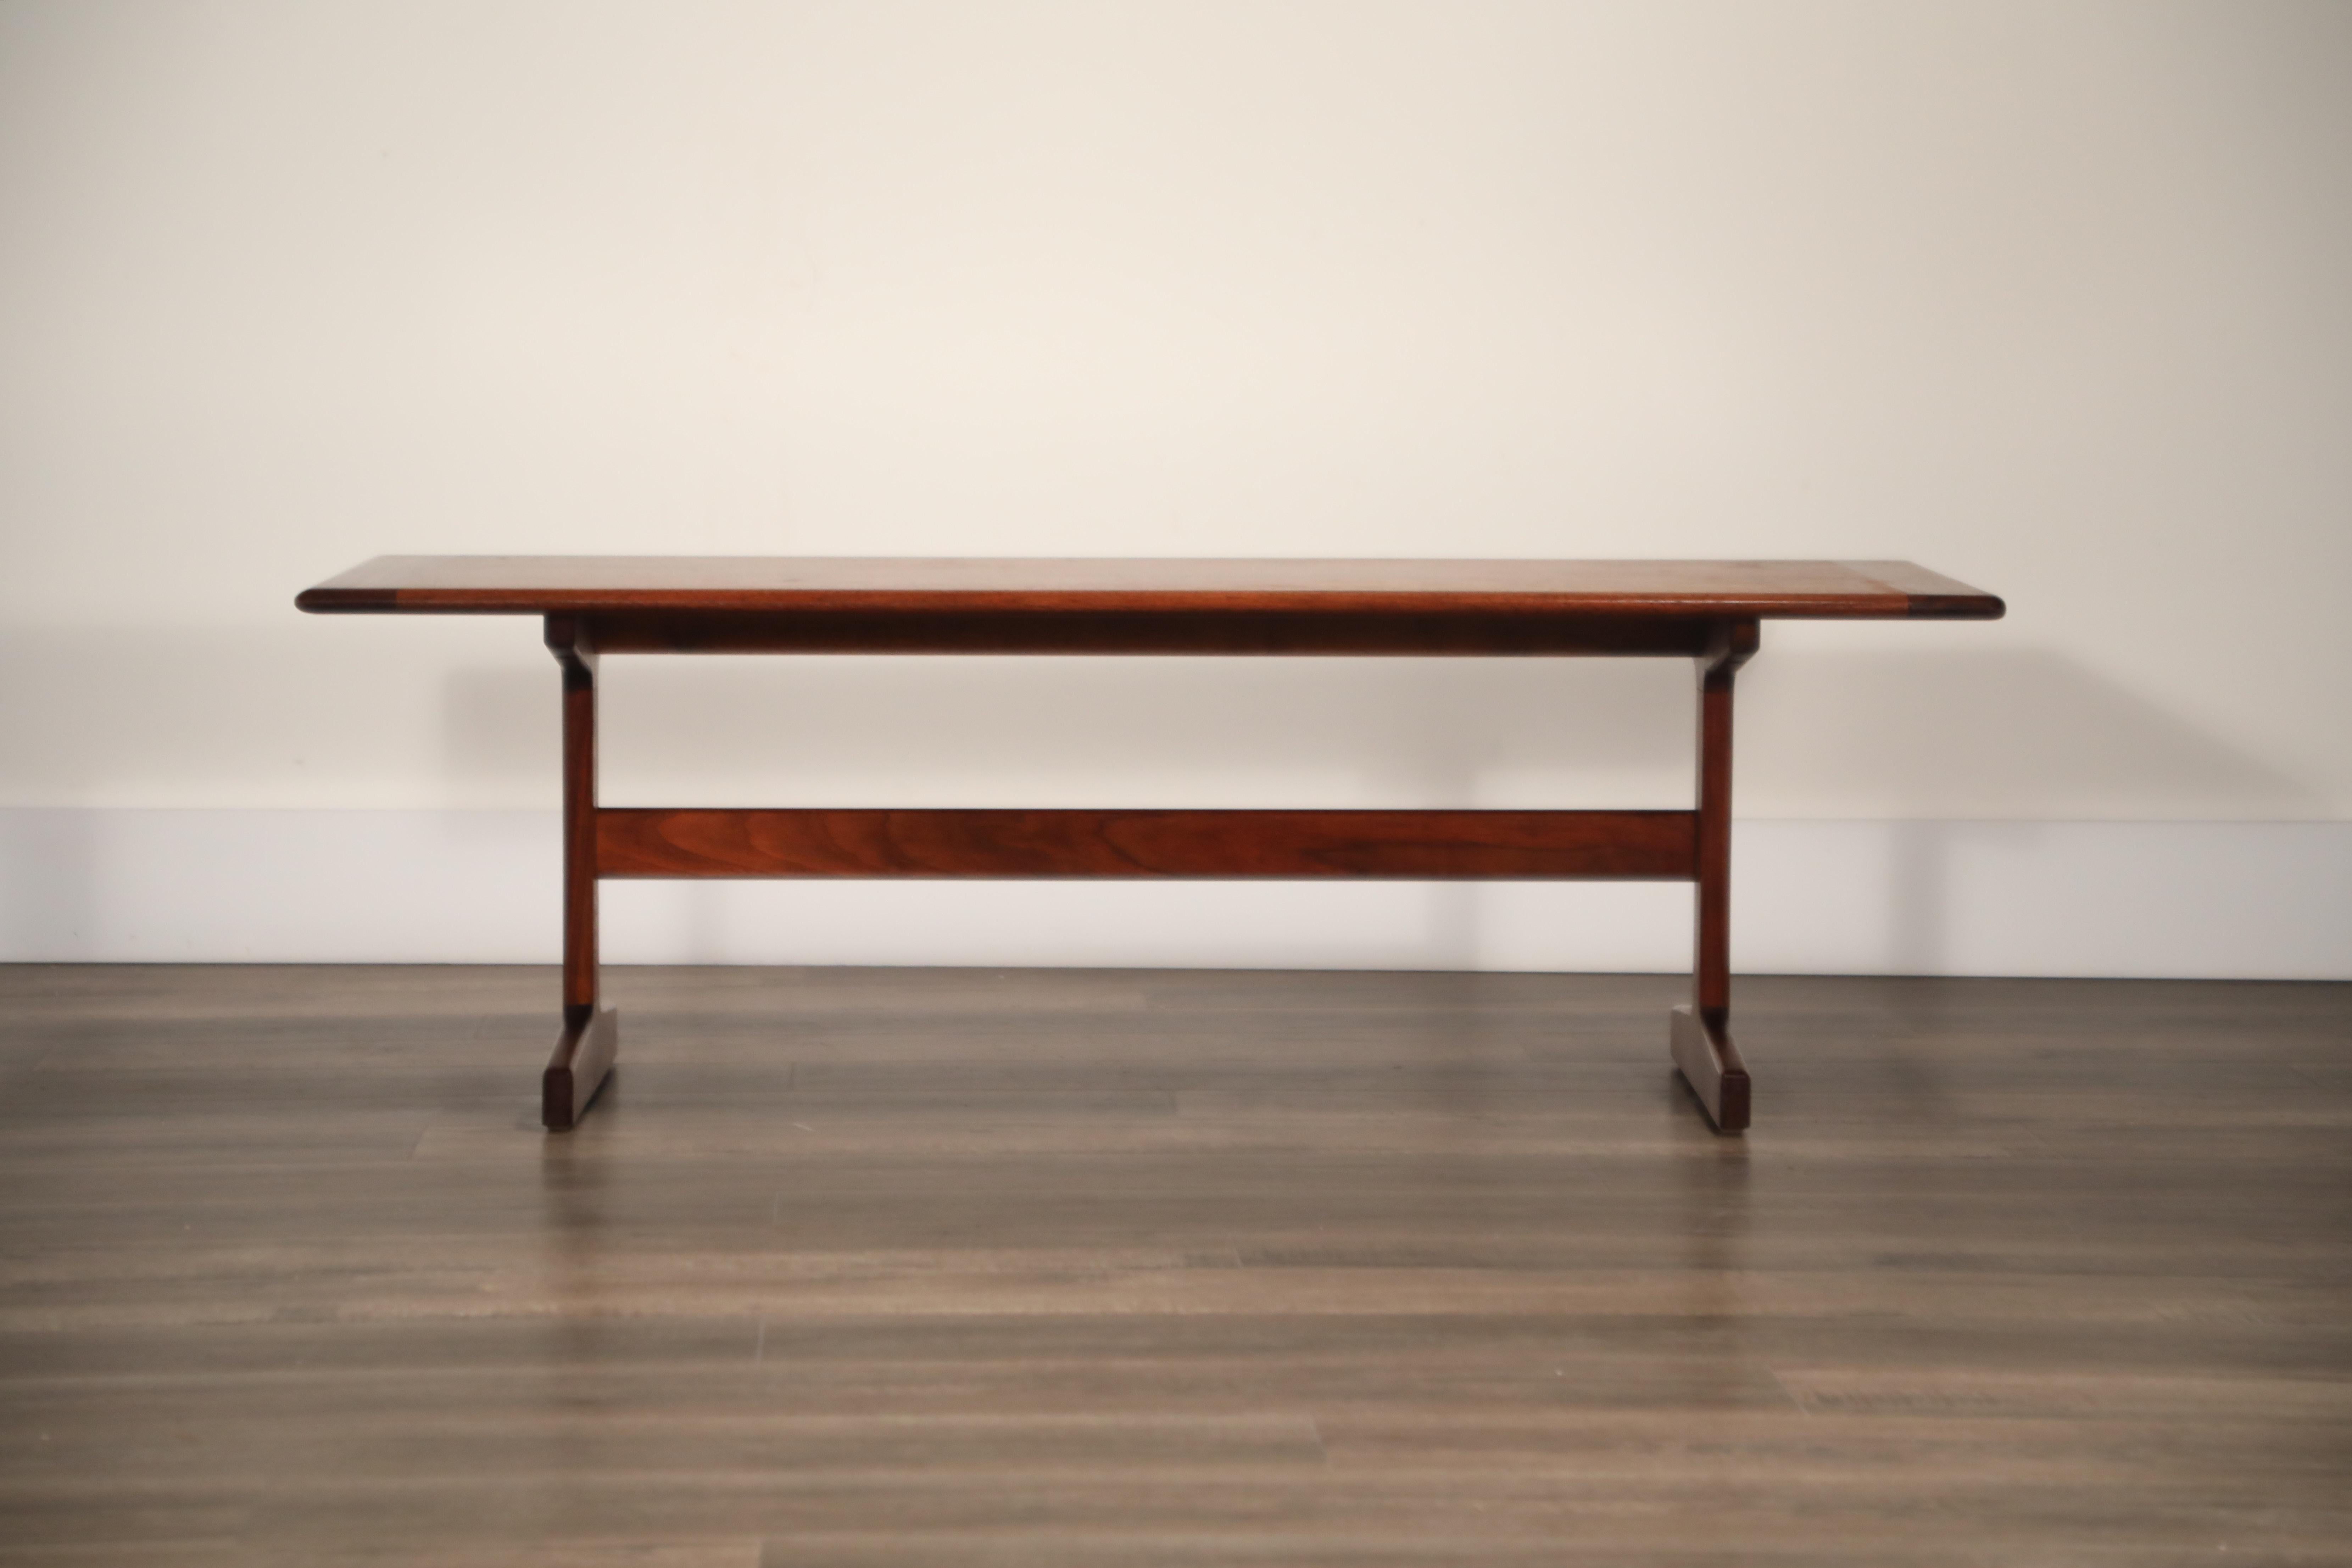 This Mid-Century Modern walnut trestle coffee table has incredible wood grain and would be a perfect fit in your home or office. The trestle base gives it plenty of adaptability to fit any style room and pair with furniture from the 1800s through